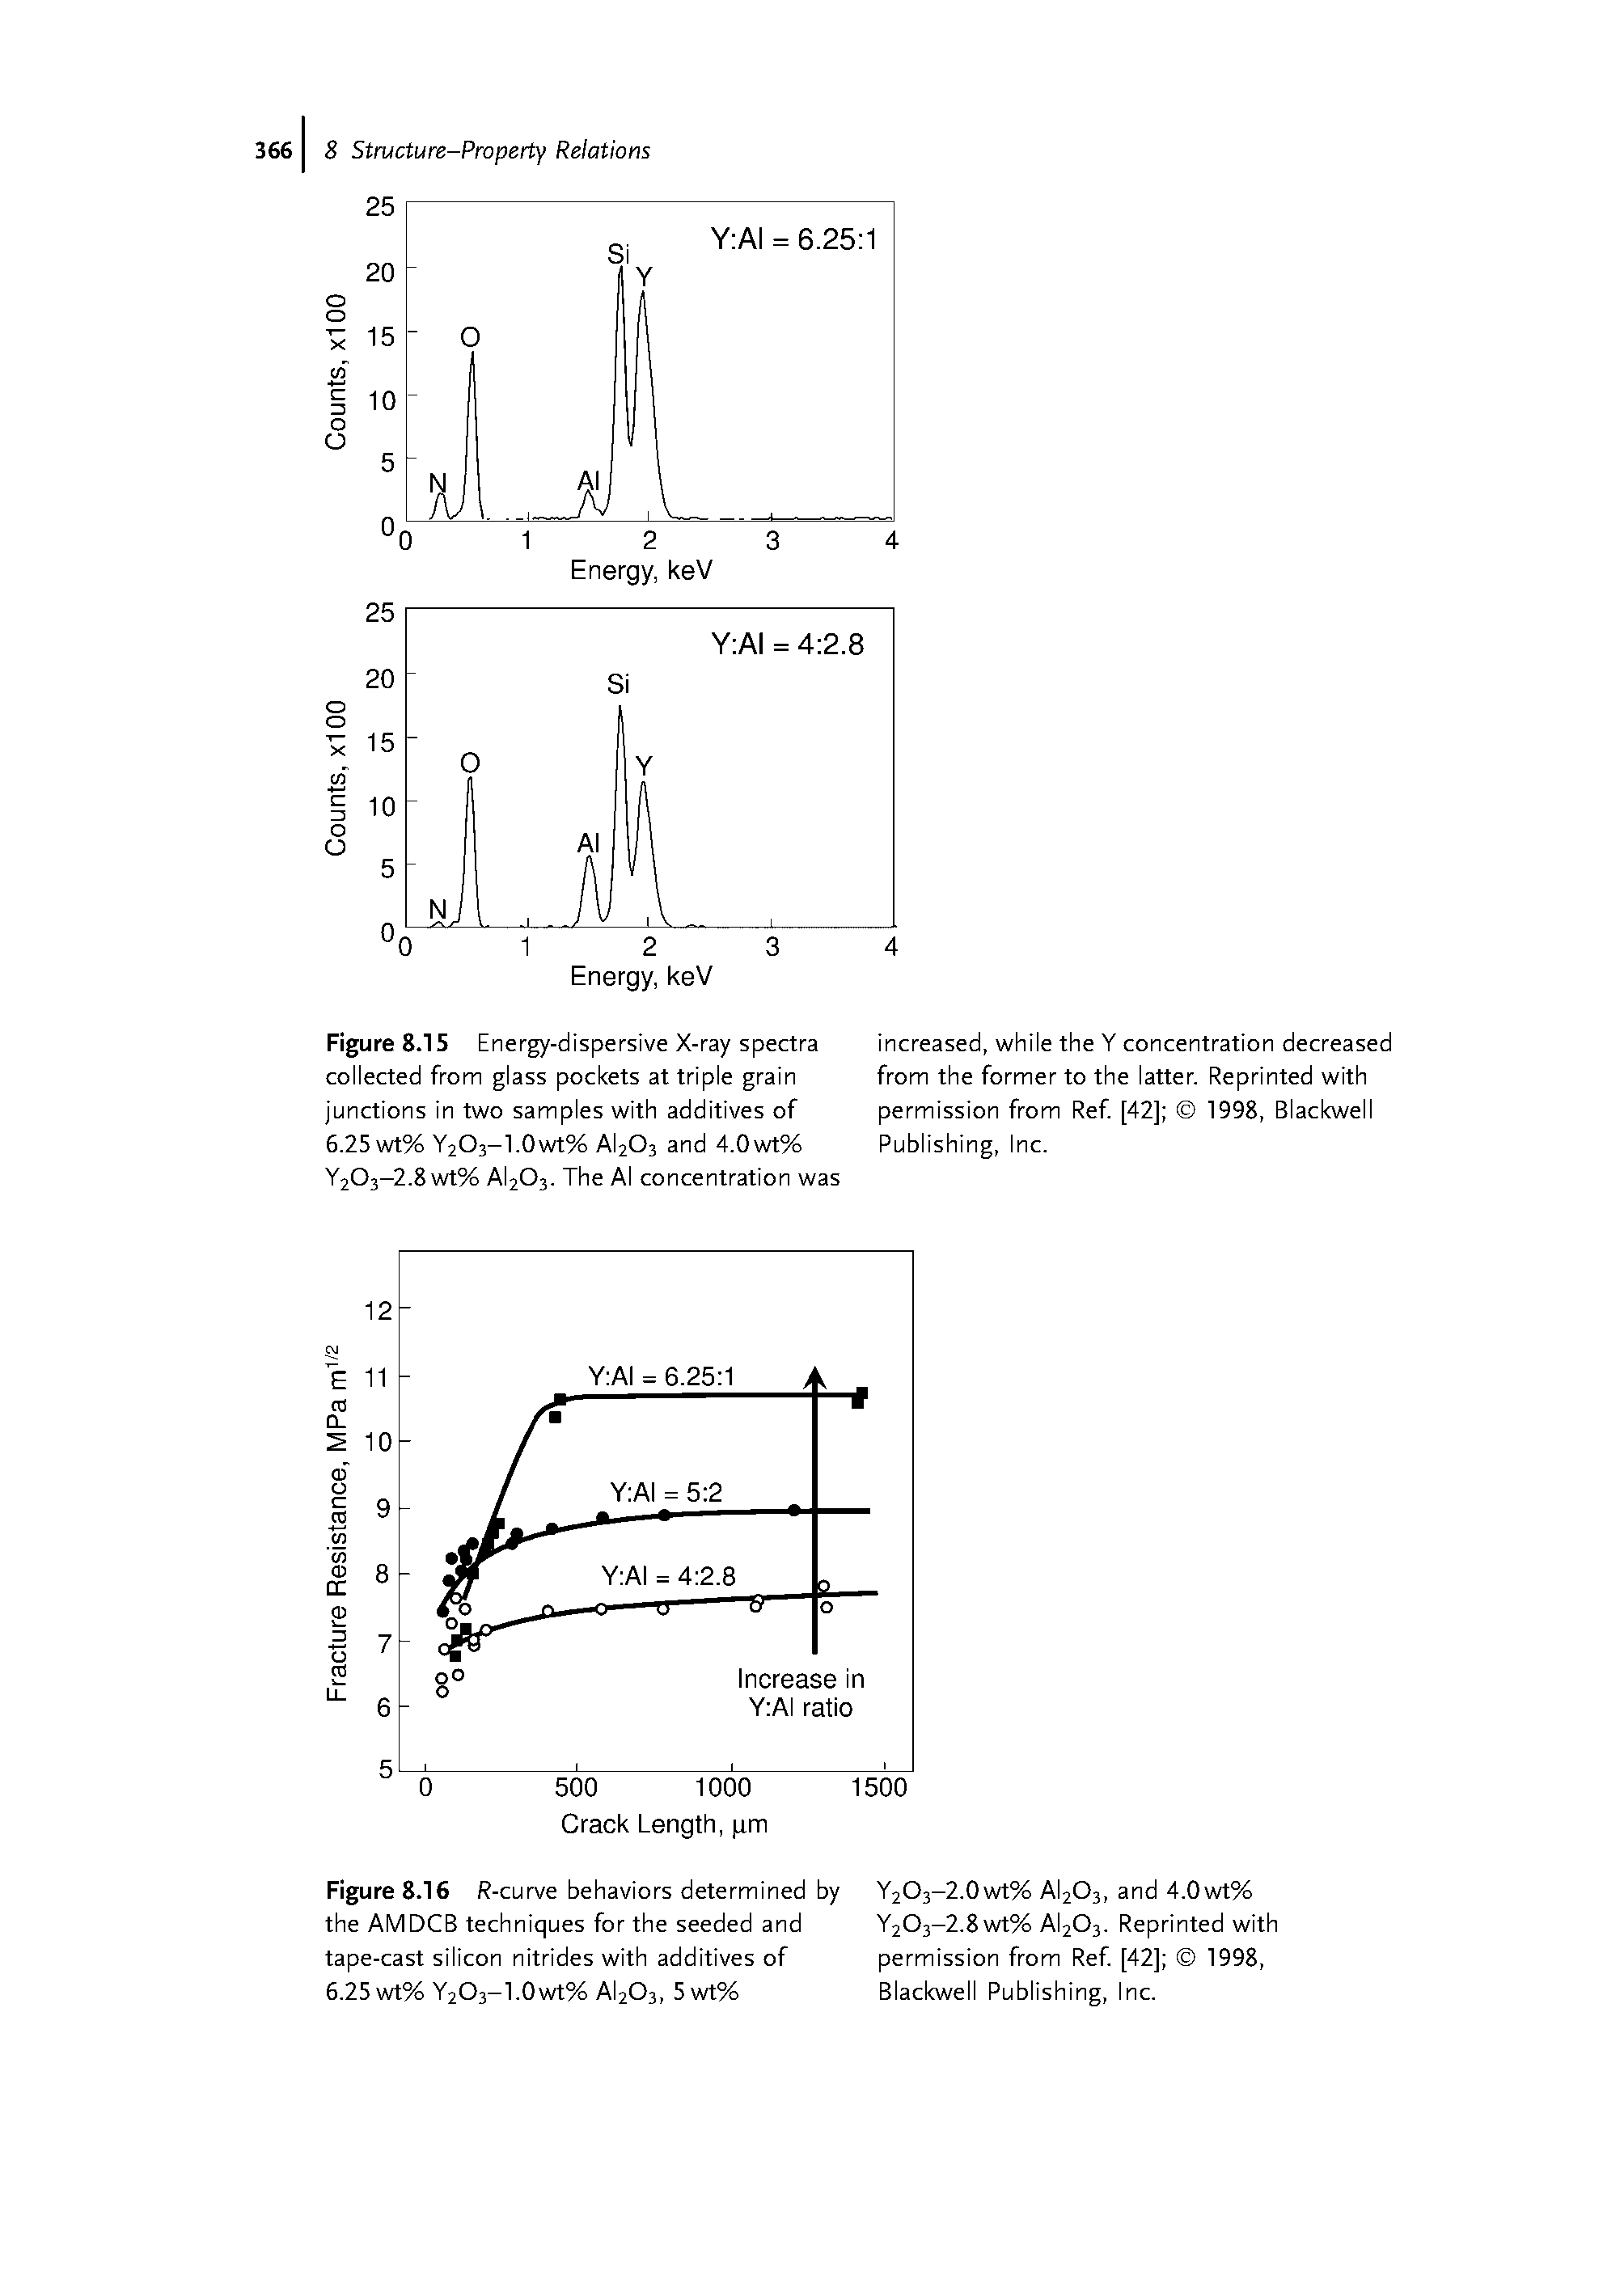 Figure 8.16 R-curve behaviors determined by the AMDCB techniques for the seeded and tape-cast silicon nitrides with additives of 6.25 wt% Y2O3-1.0wt% AI2O3, 5wt%...